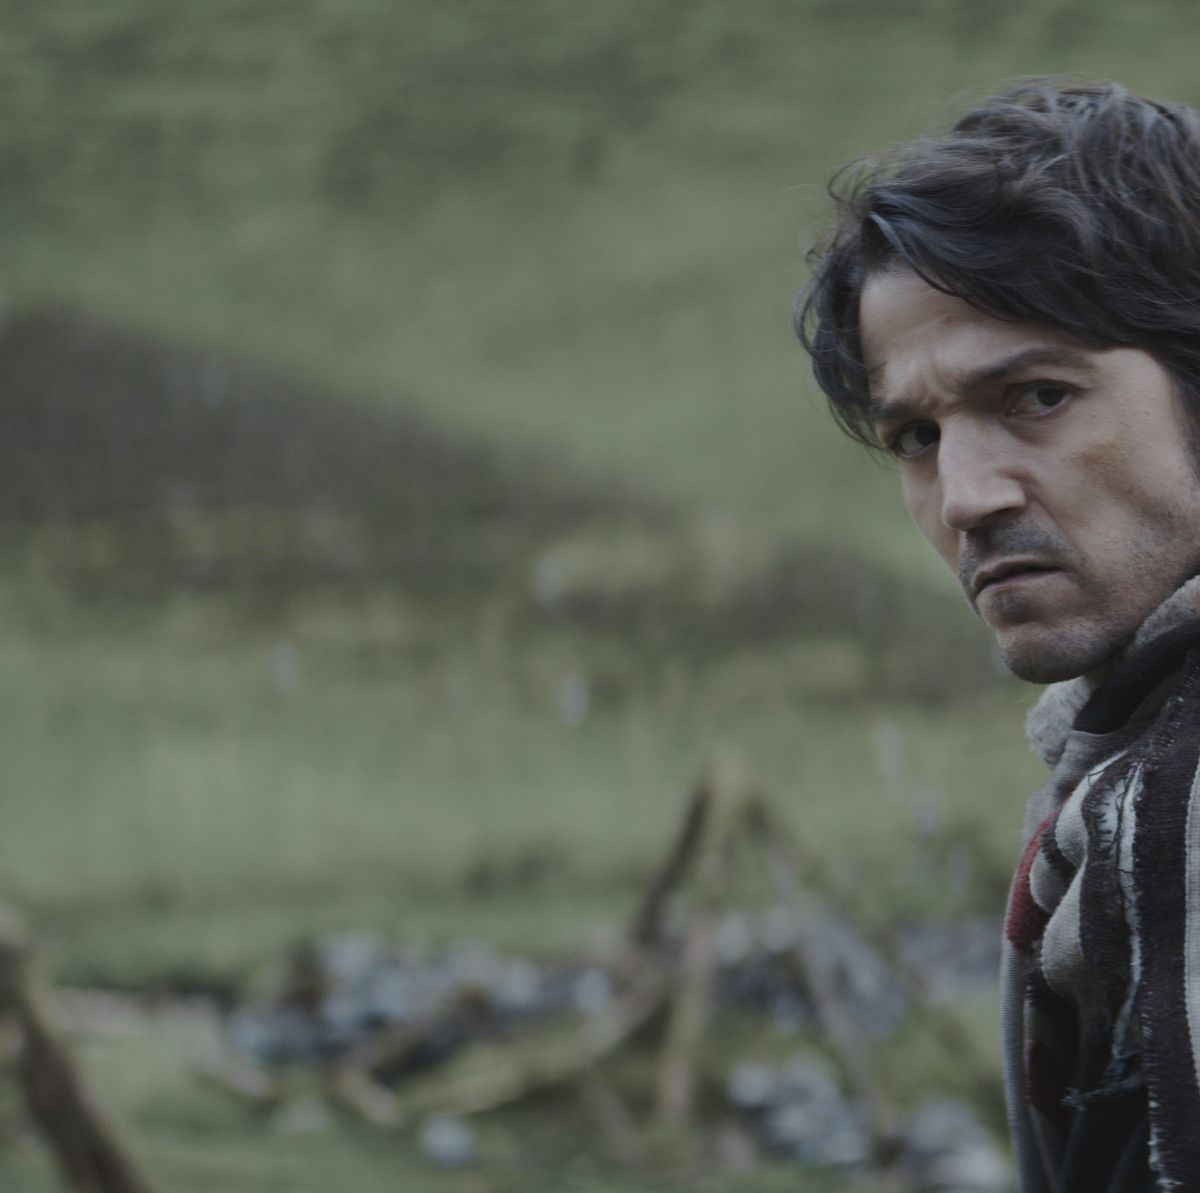 Star Wars: Andor' is 'supposed to be different,' says Diego Luna